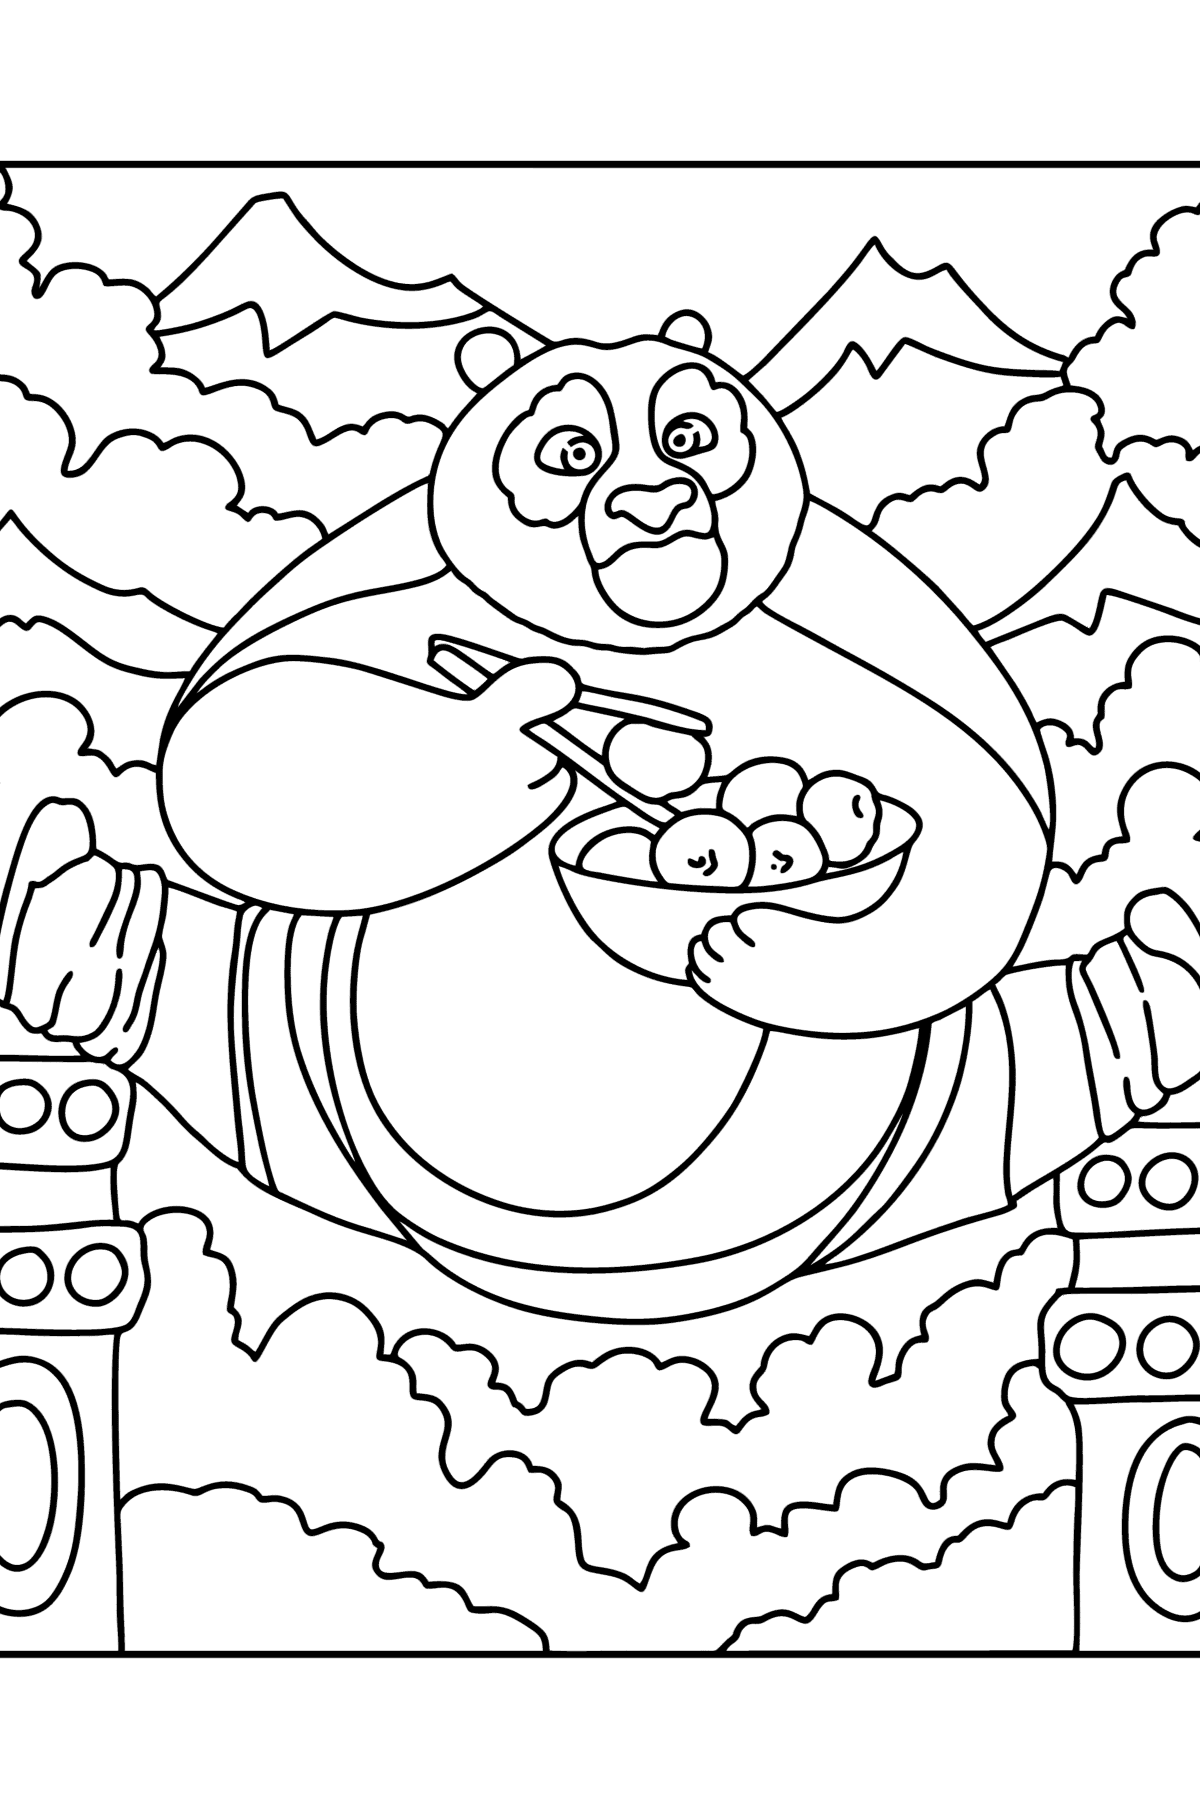 Kung fu panda Po coloring page - Coloring Pages for Kids